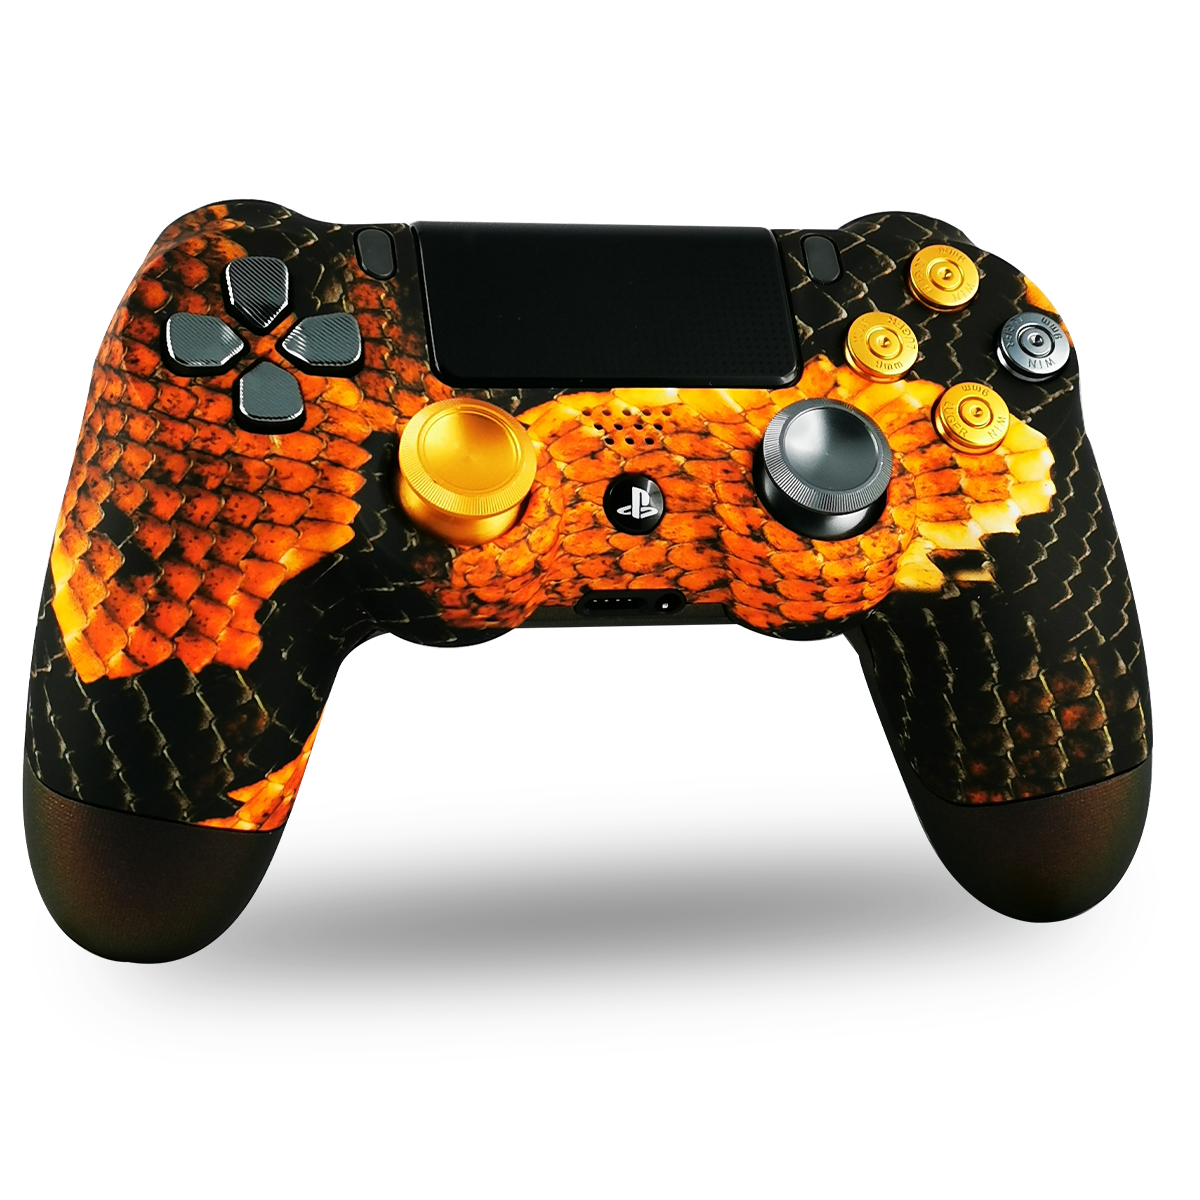 manette-PS4-custom-playstation-4-sony-personnalisee-drawmypad-Anna